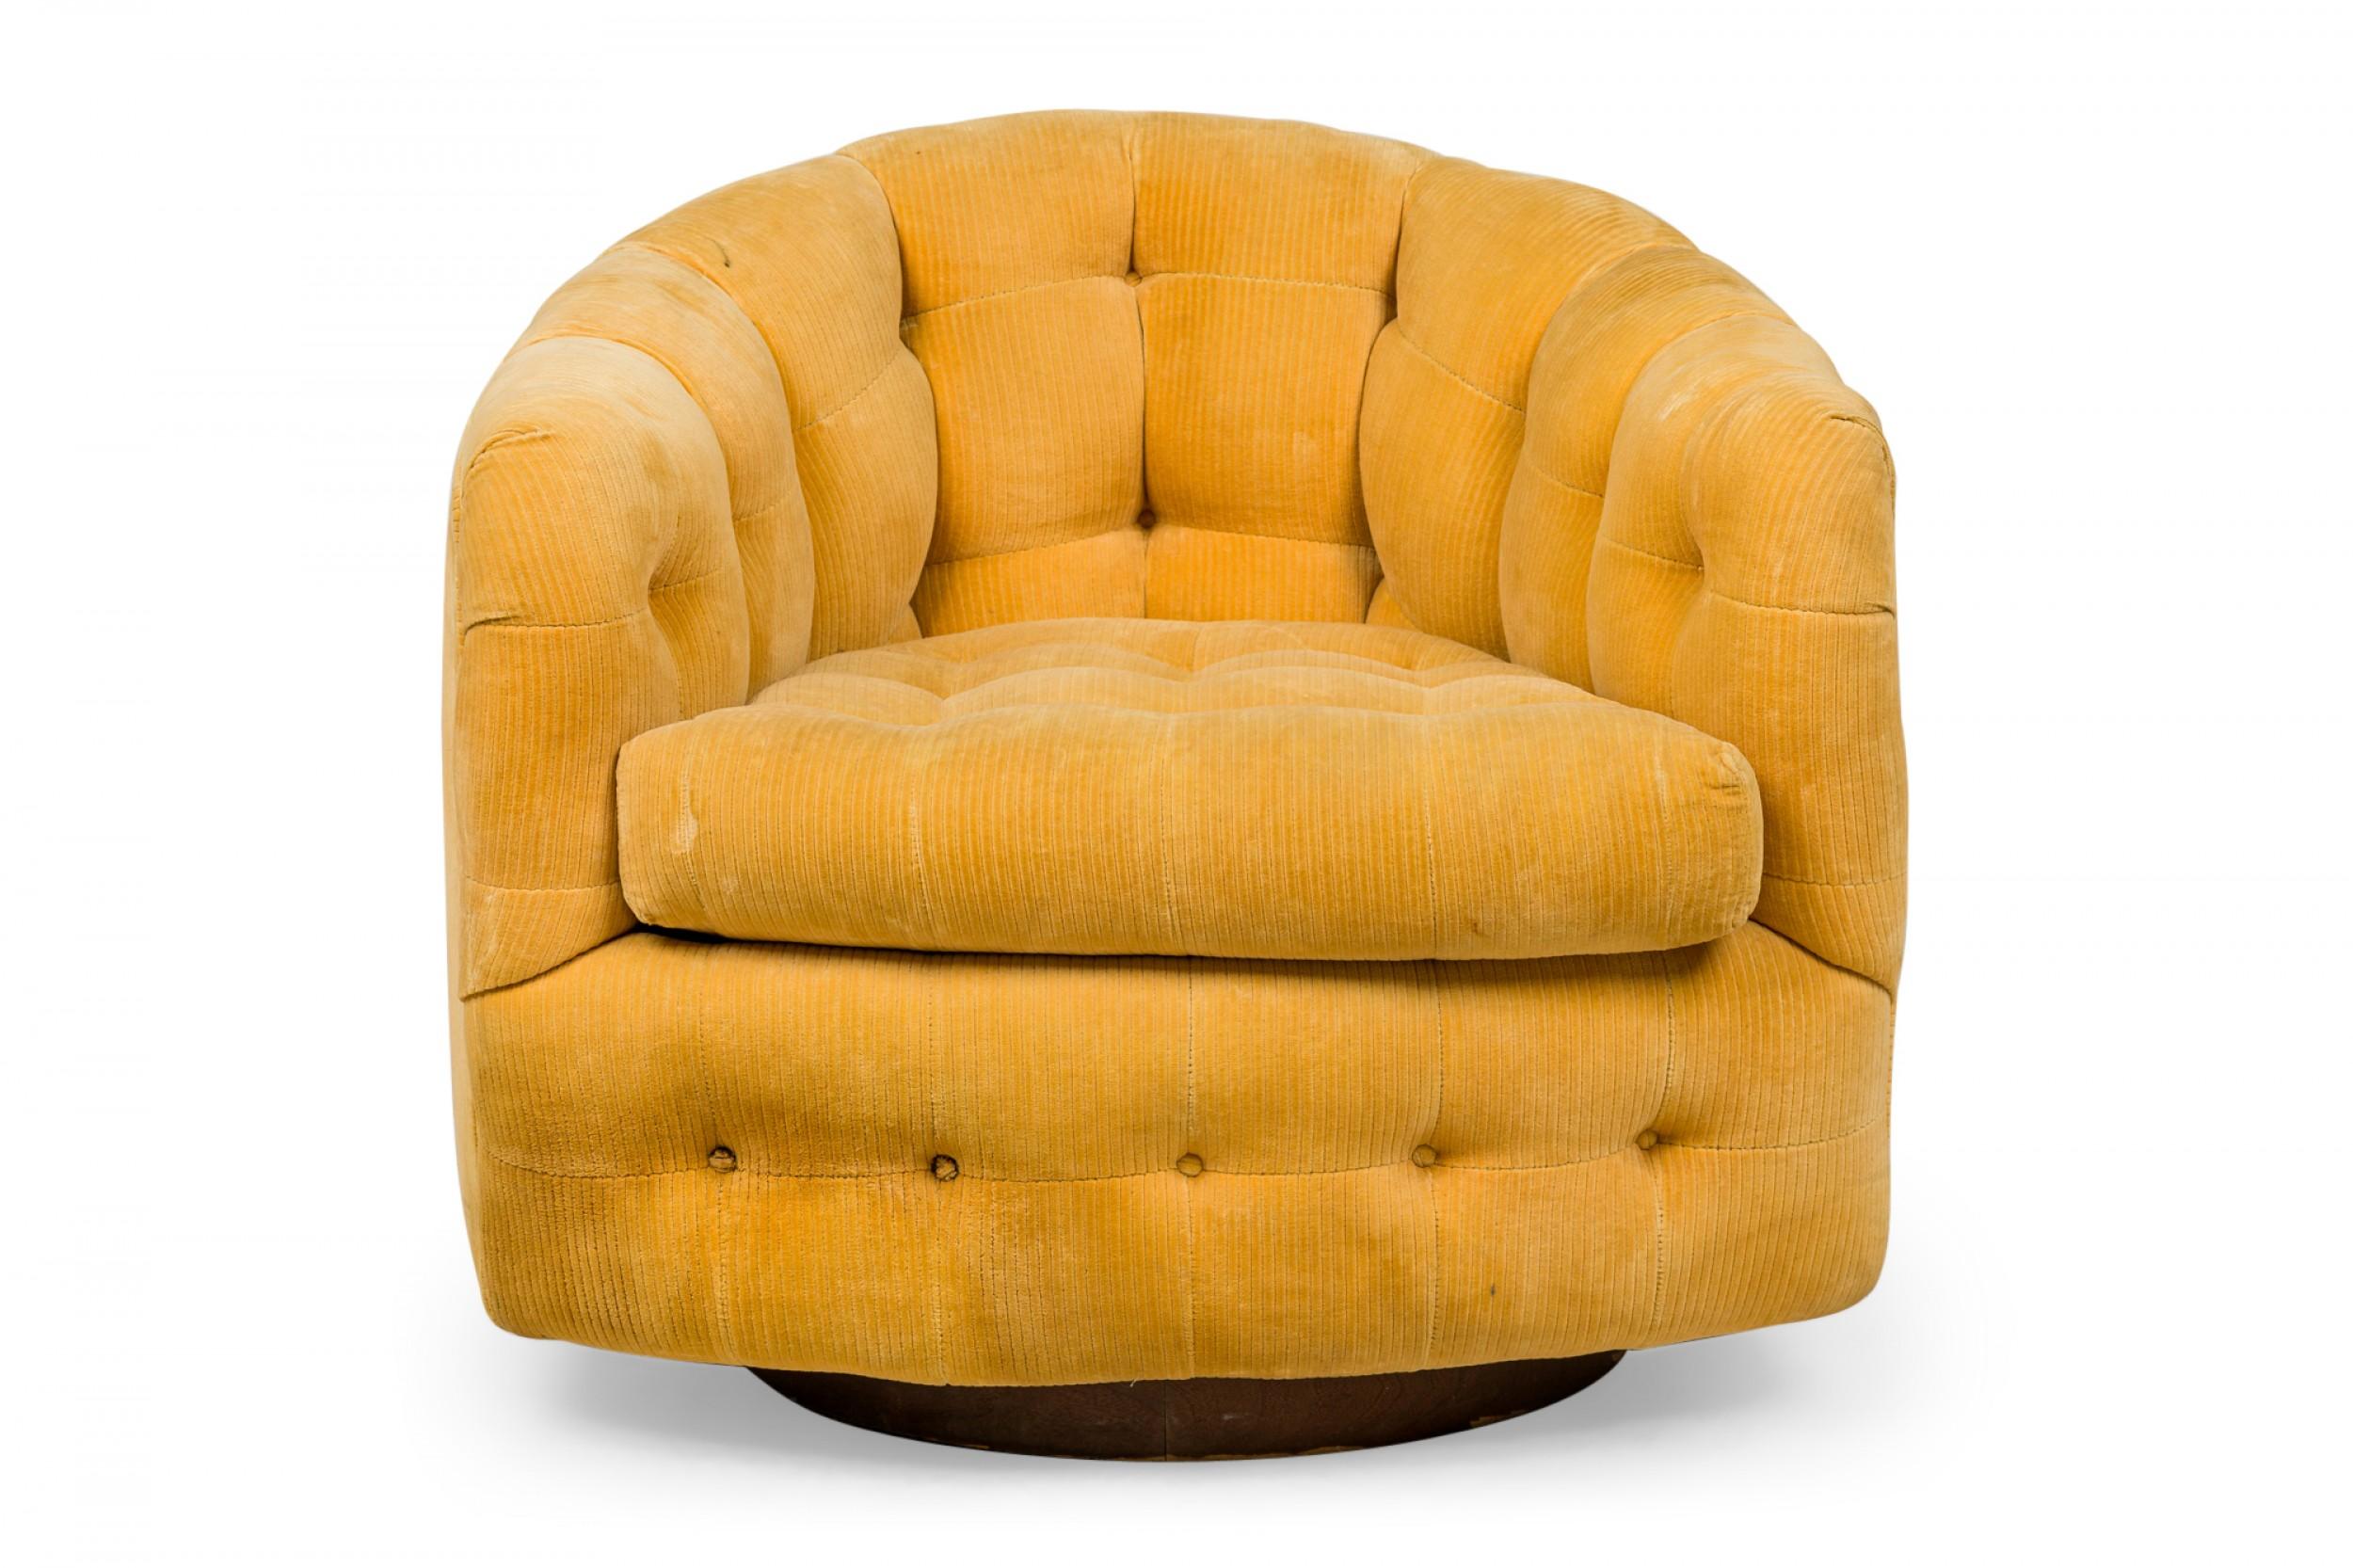 American Mid-Century horseshoe-form lounge / armchair with canary yellow button tufted velour upholstery with a removable seat cushion resting on a wood veneer plinth base. (MILO BAUGHMAN FOR THAYER COGGIN)